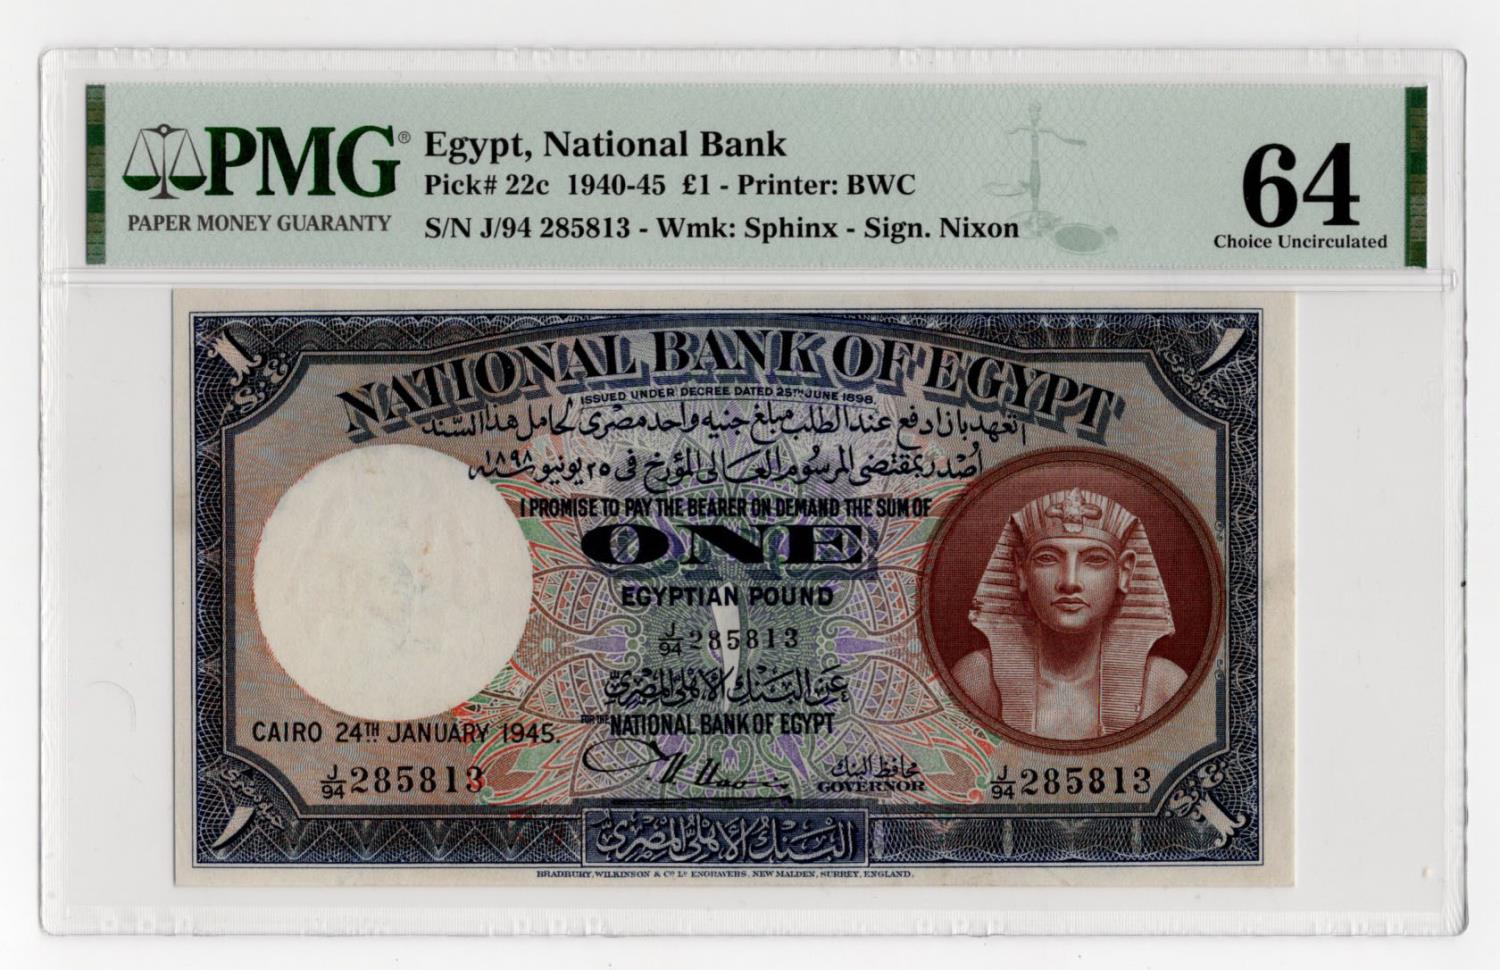 Egypt 1 Pound dated 24th January 1945, signed Nixon, serial J/94 285813 (BNB B121c, Pick22c) in